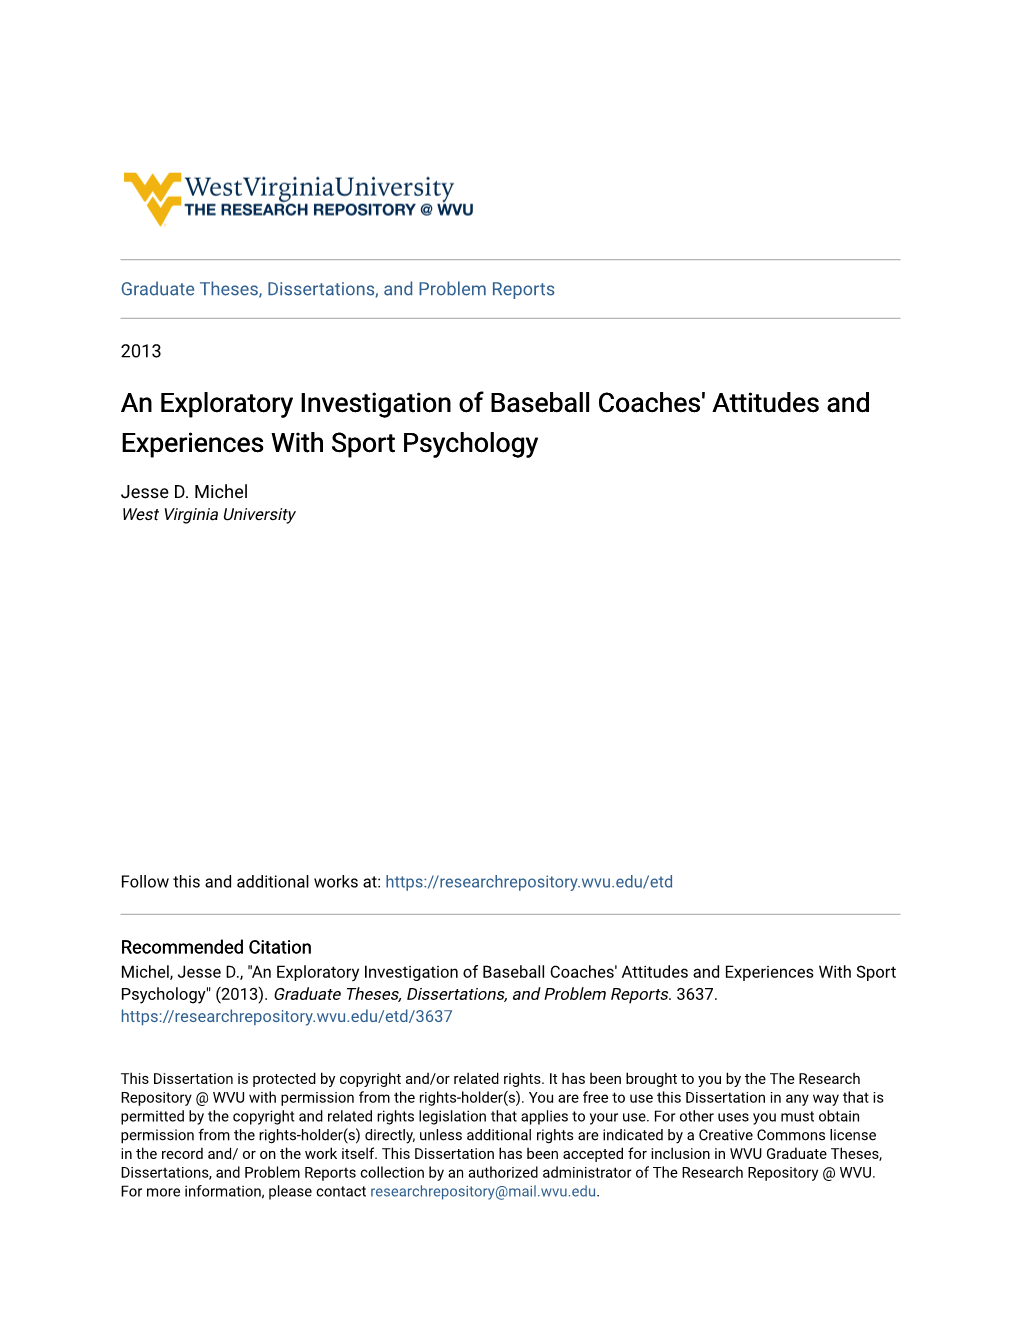 An Exploratory Investigation of Baseball Coaches' Attitudes and Experiences with Sport Psychology